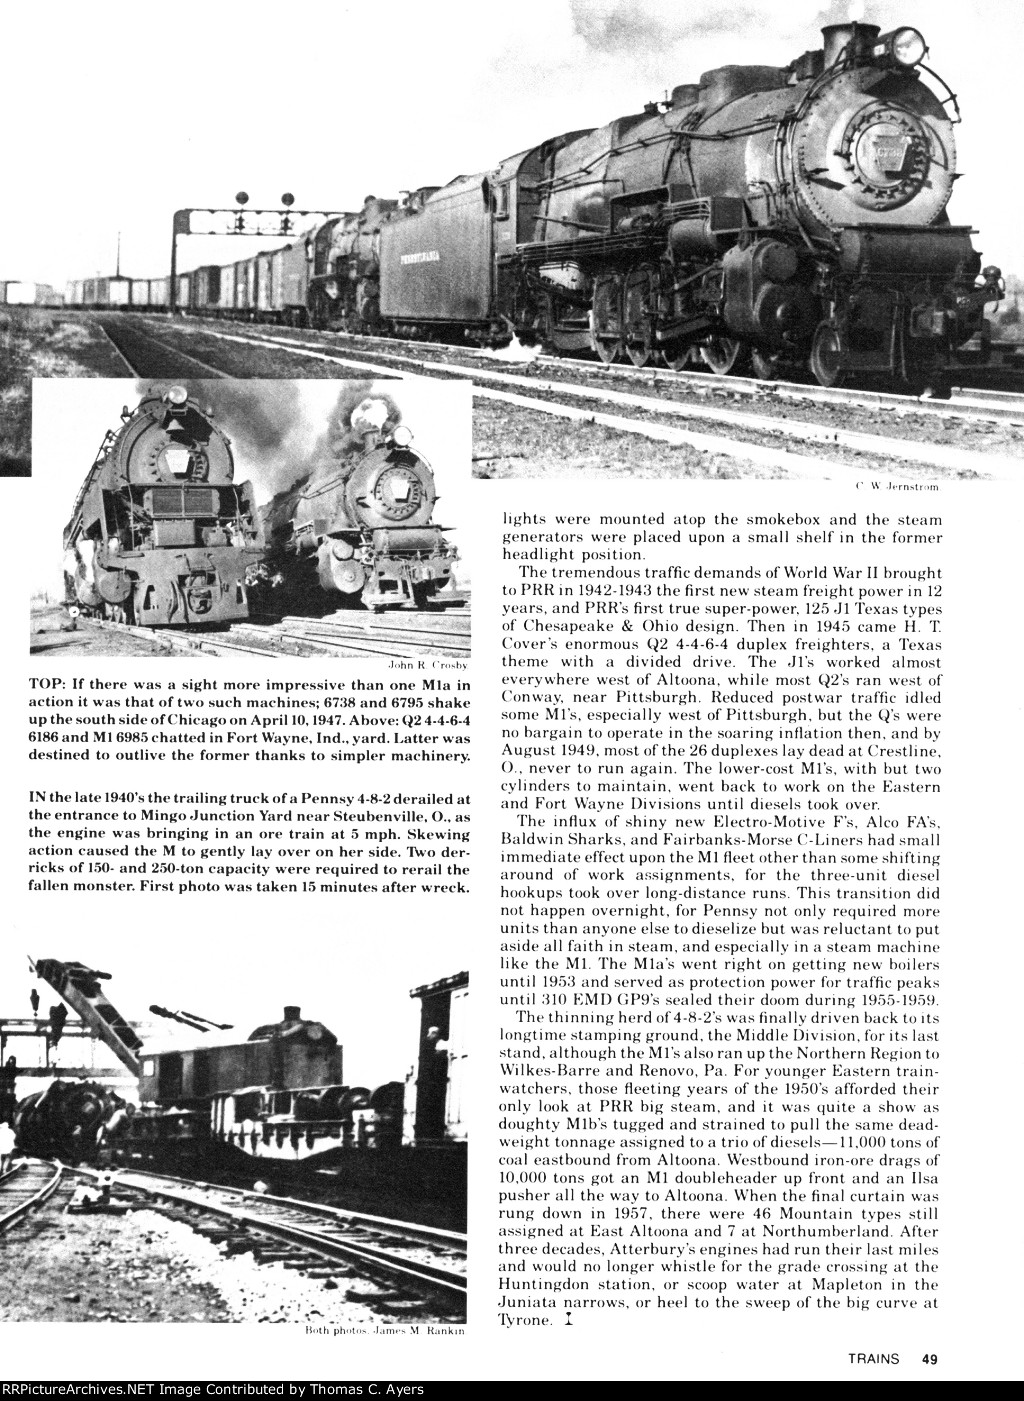 Atterbury's M-1 Engines: Part 2, Page 49, 1979